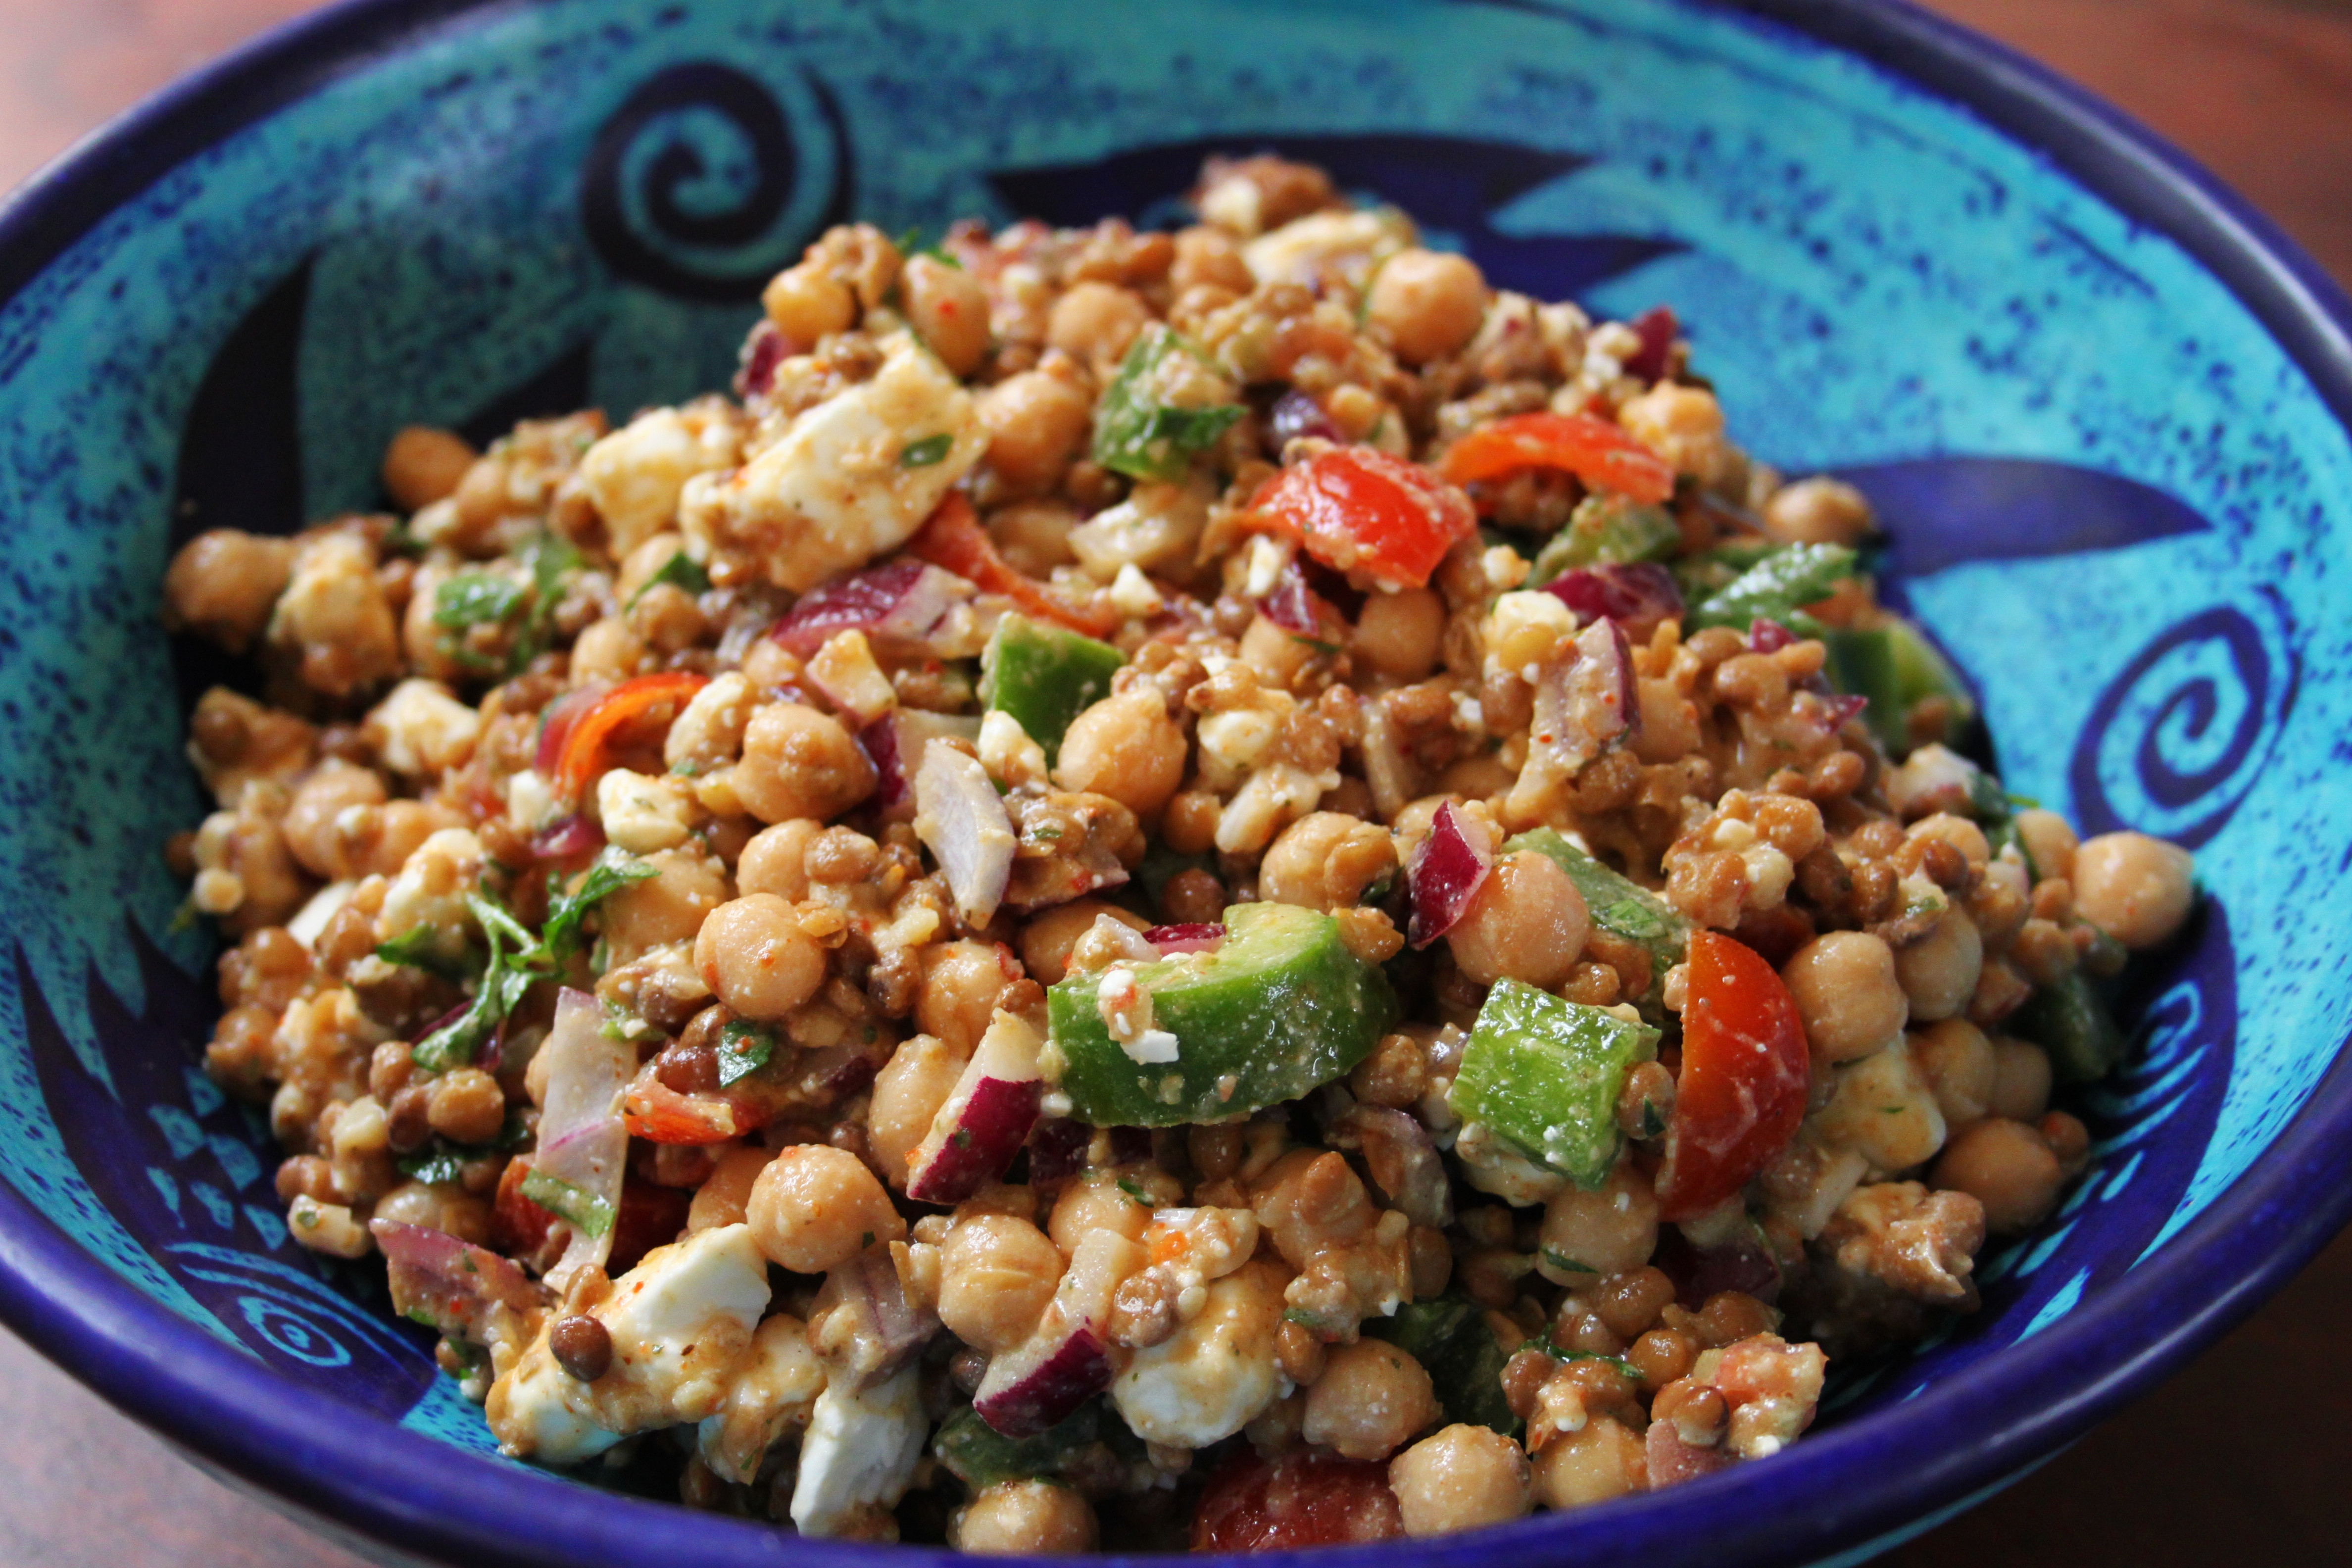 Tasty Healthy Snacks
 Today’s healthy and delicious lunch idea Chickpea lentil